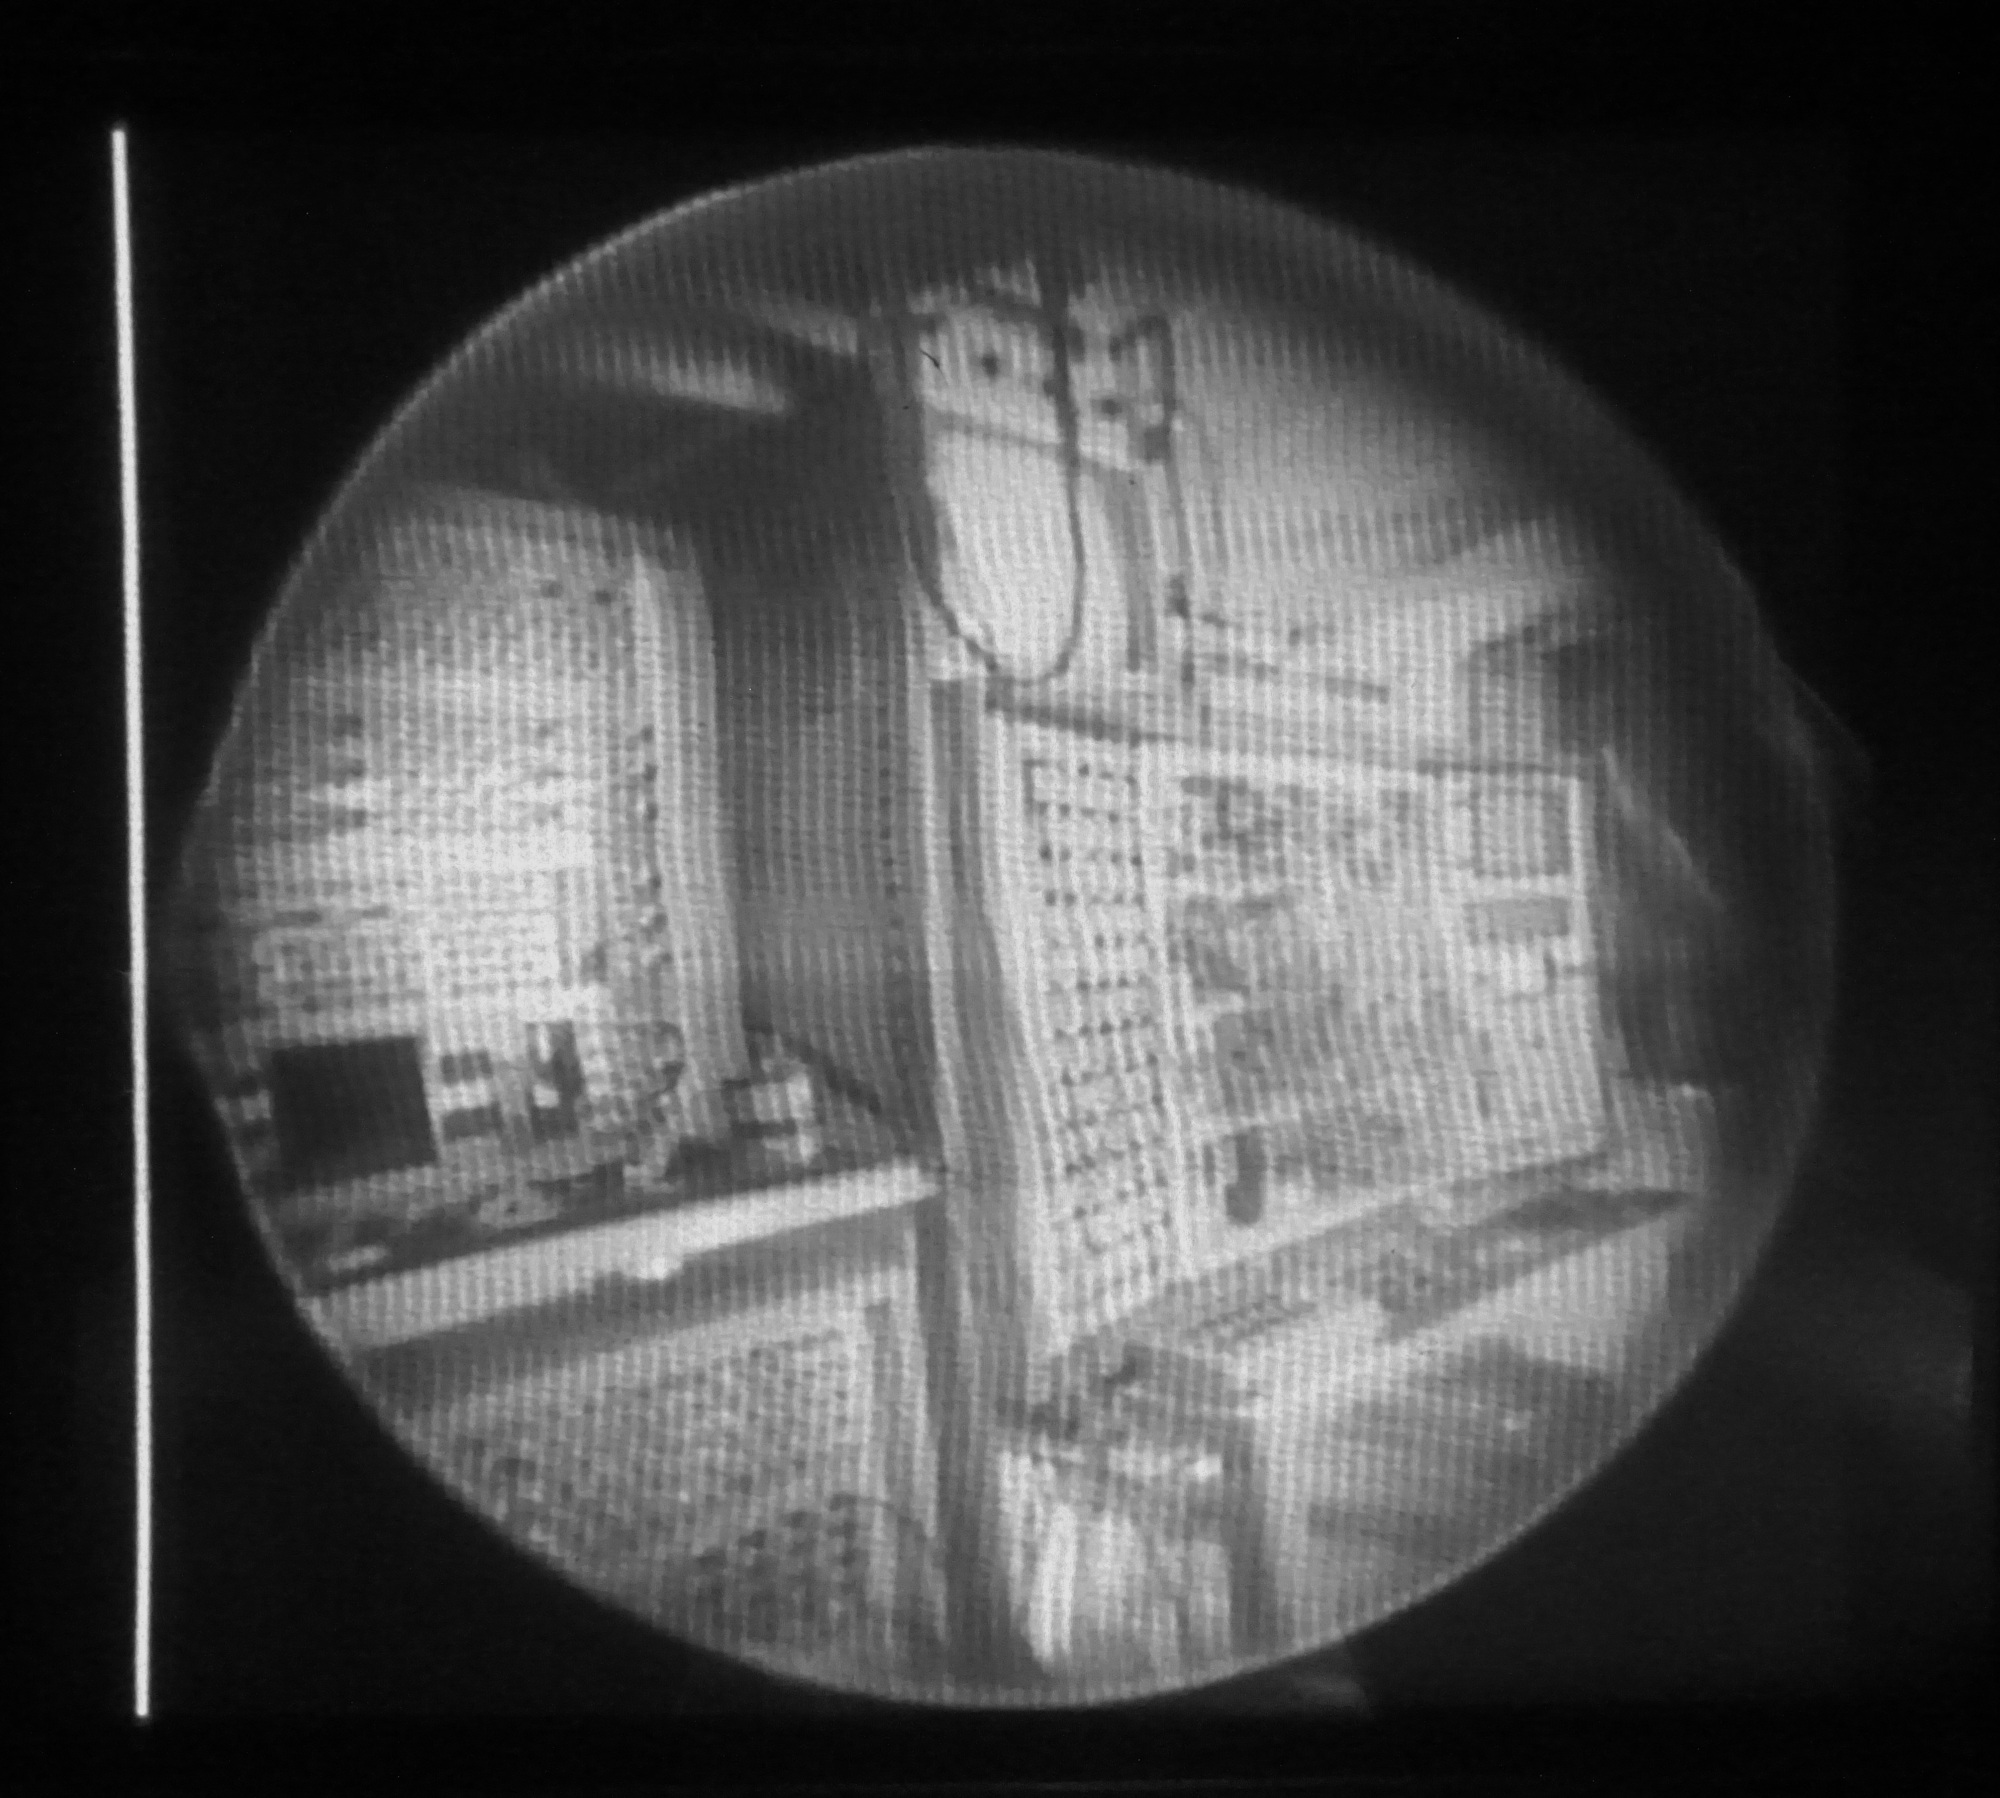 One of the first test images: a studio view while scanning the whole surface of the tube.